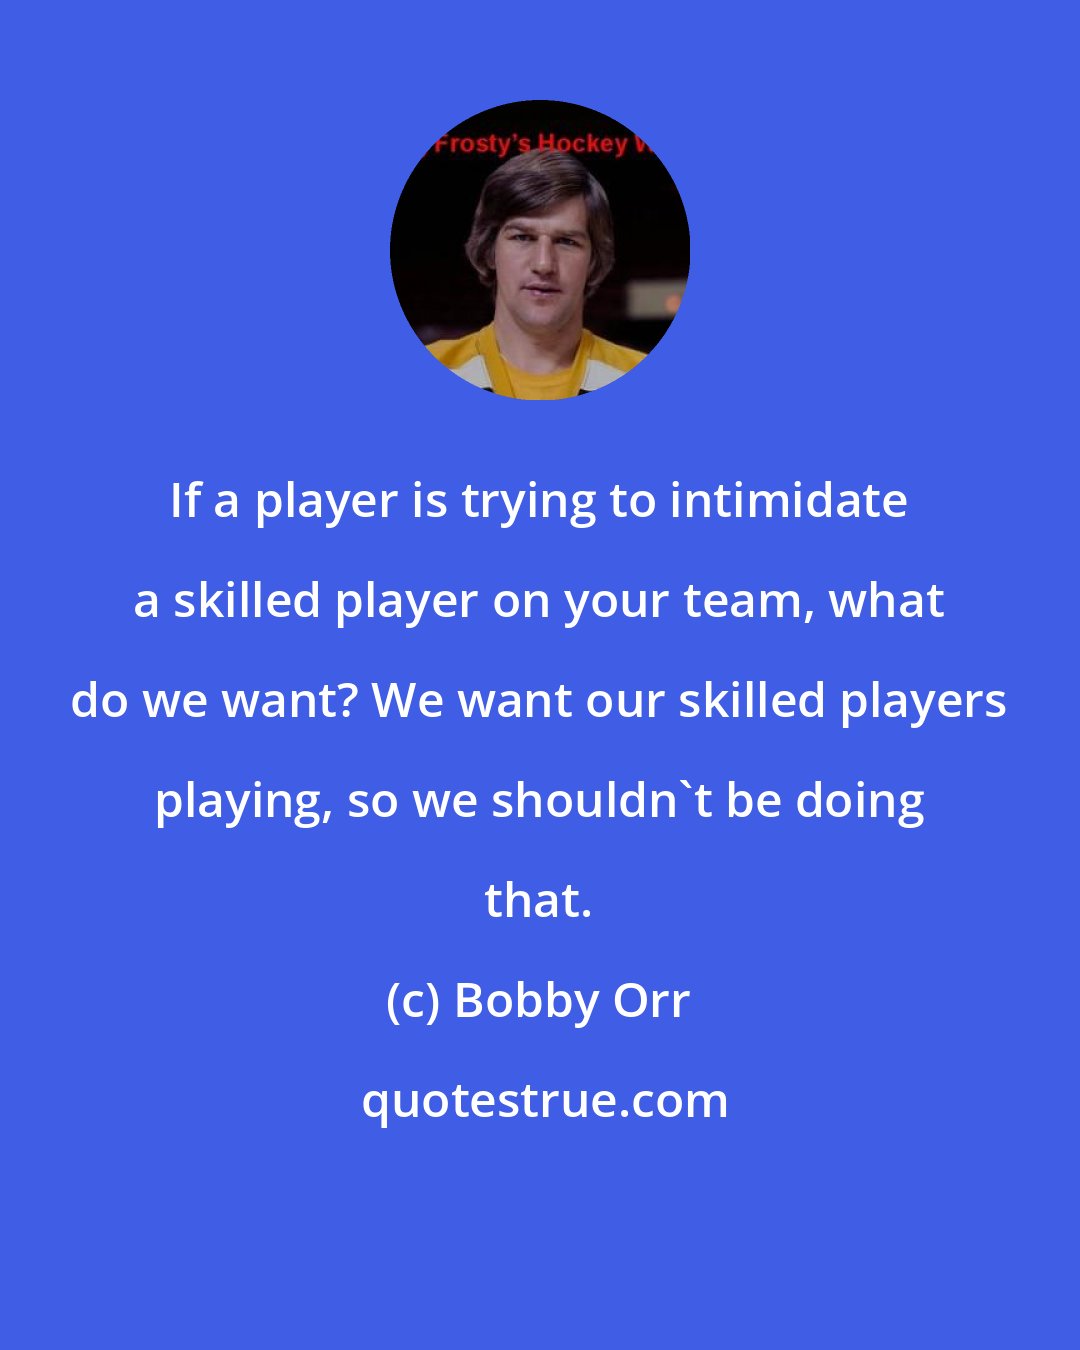 Bobby Orr: If a player is trying to intimidate a skilled player on your team, what do we want? We want our skilled players playing, so we shouldn't be doing that.